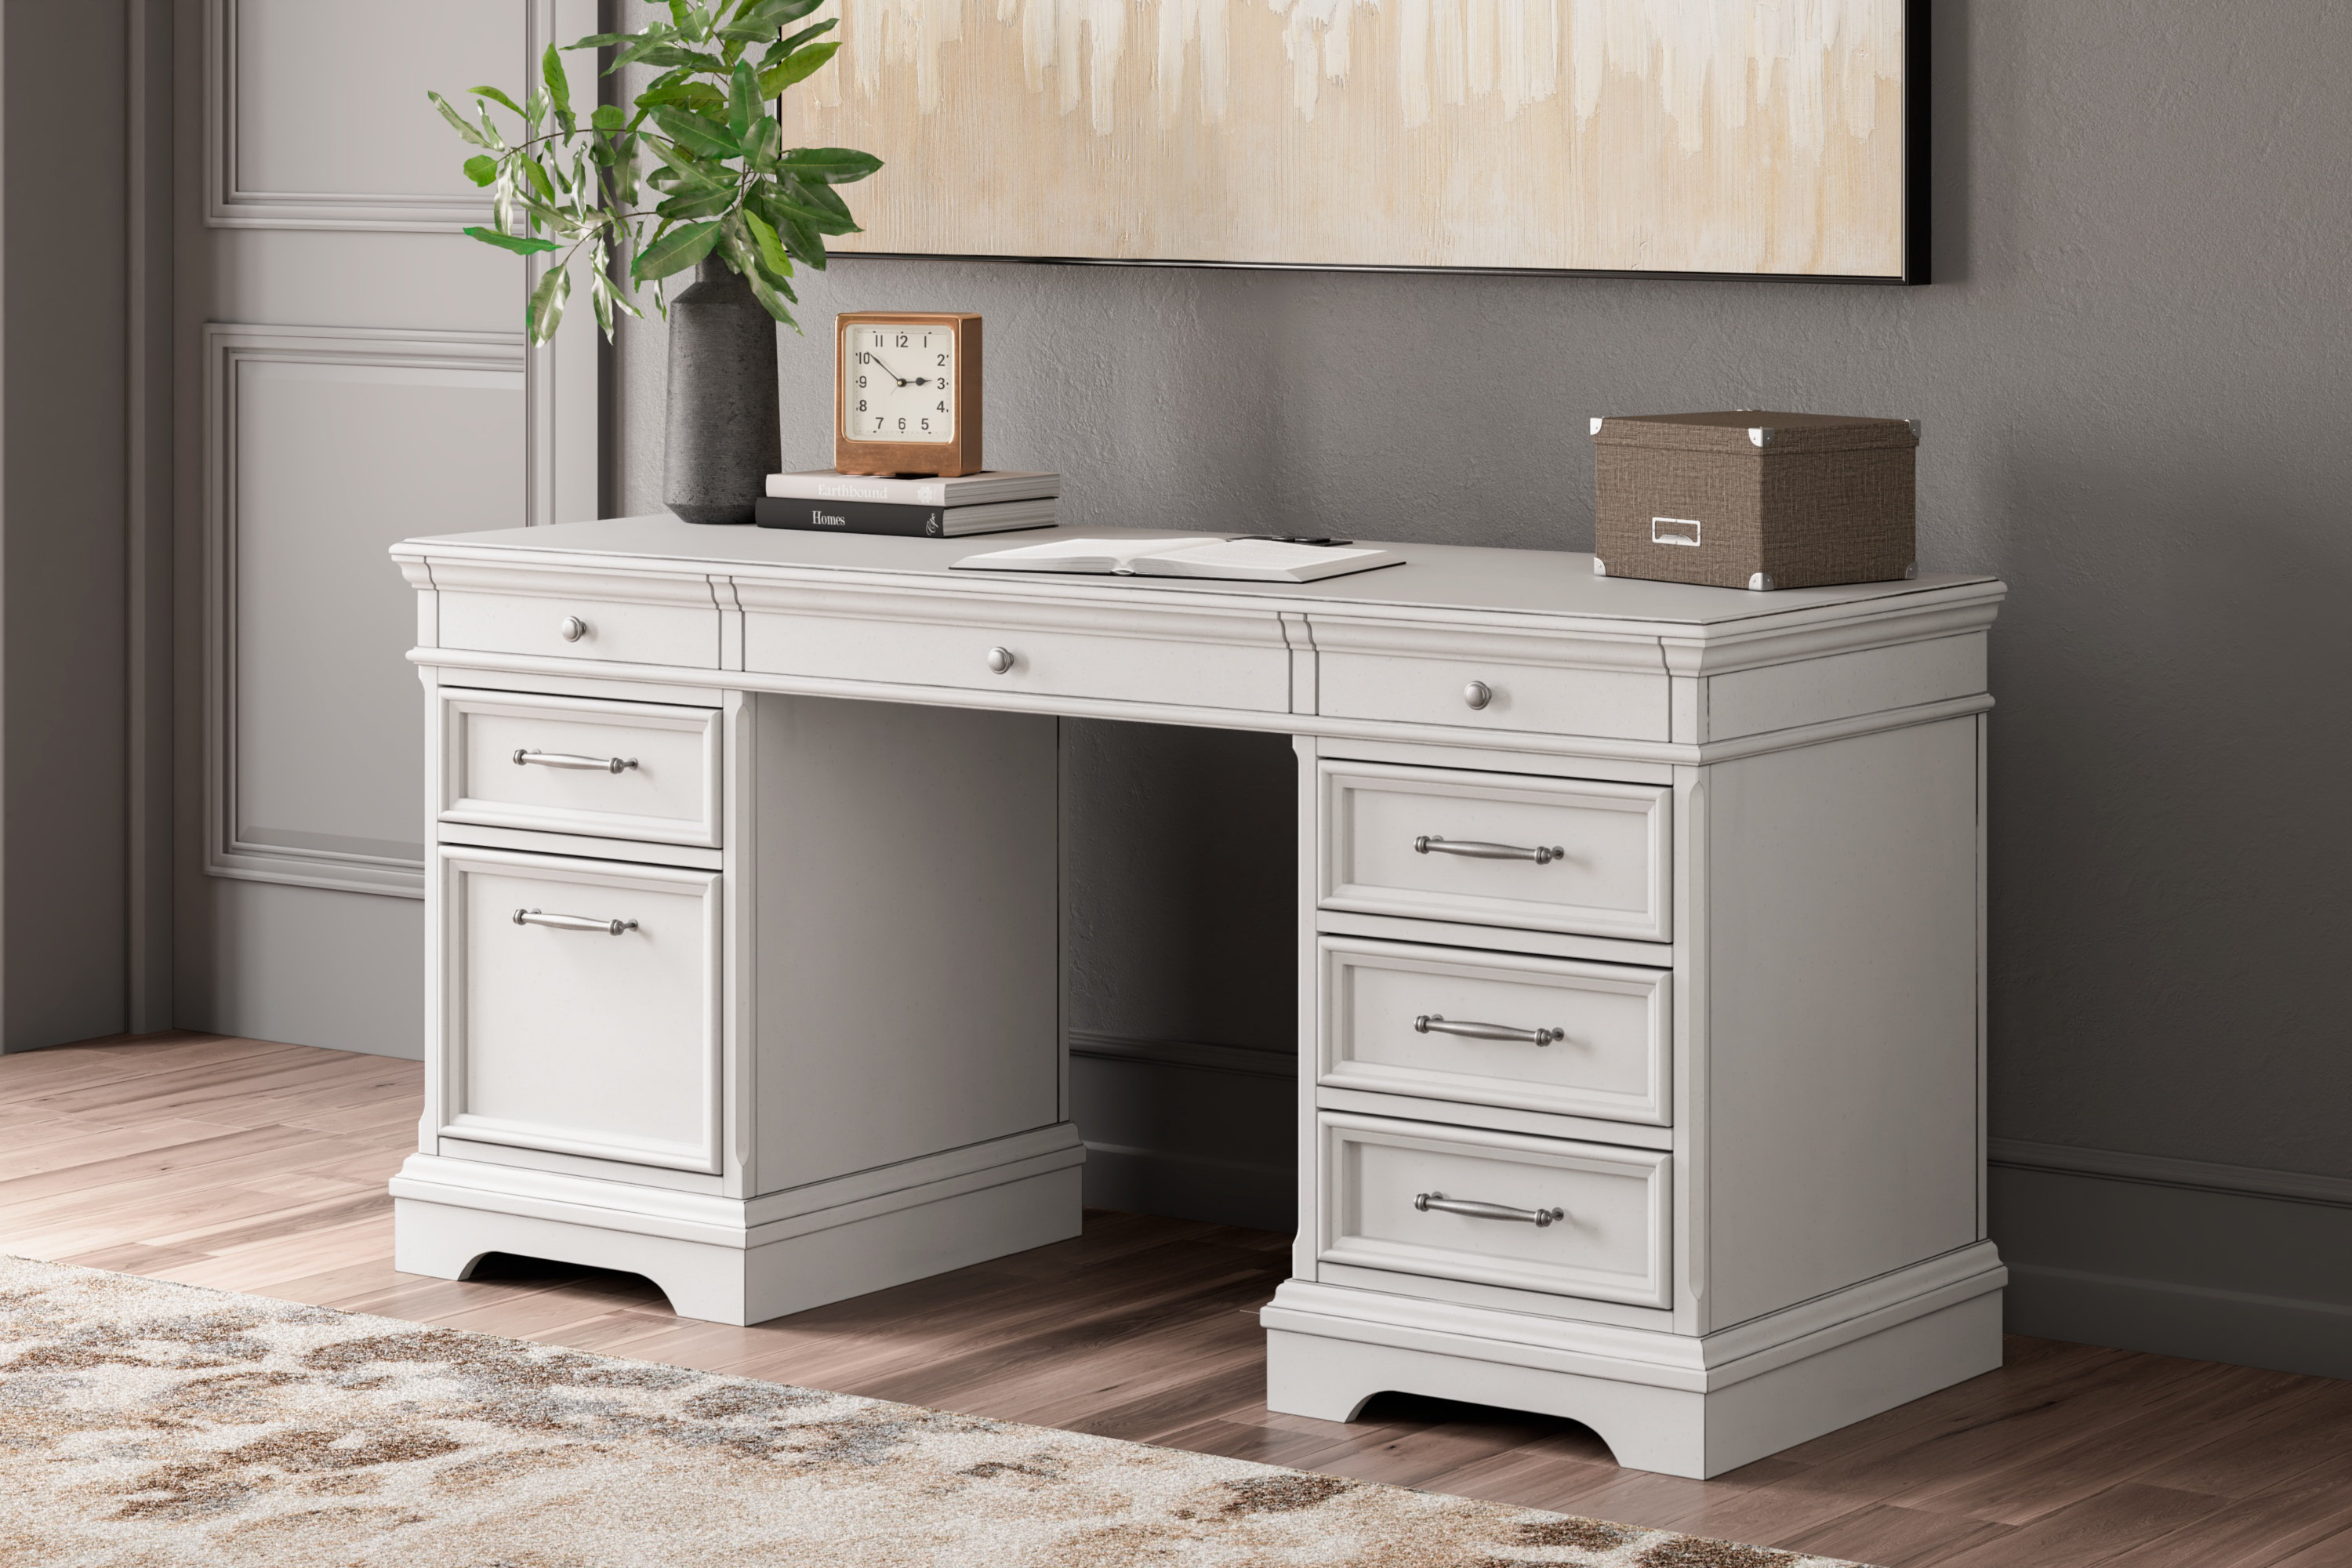 Janismore Credenza Desk With Built In Outlets 